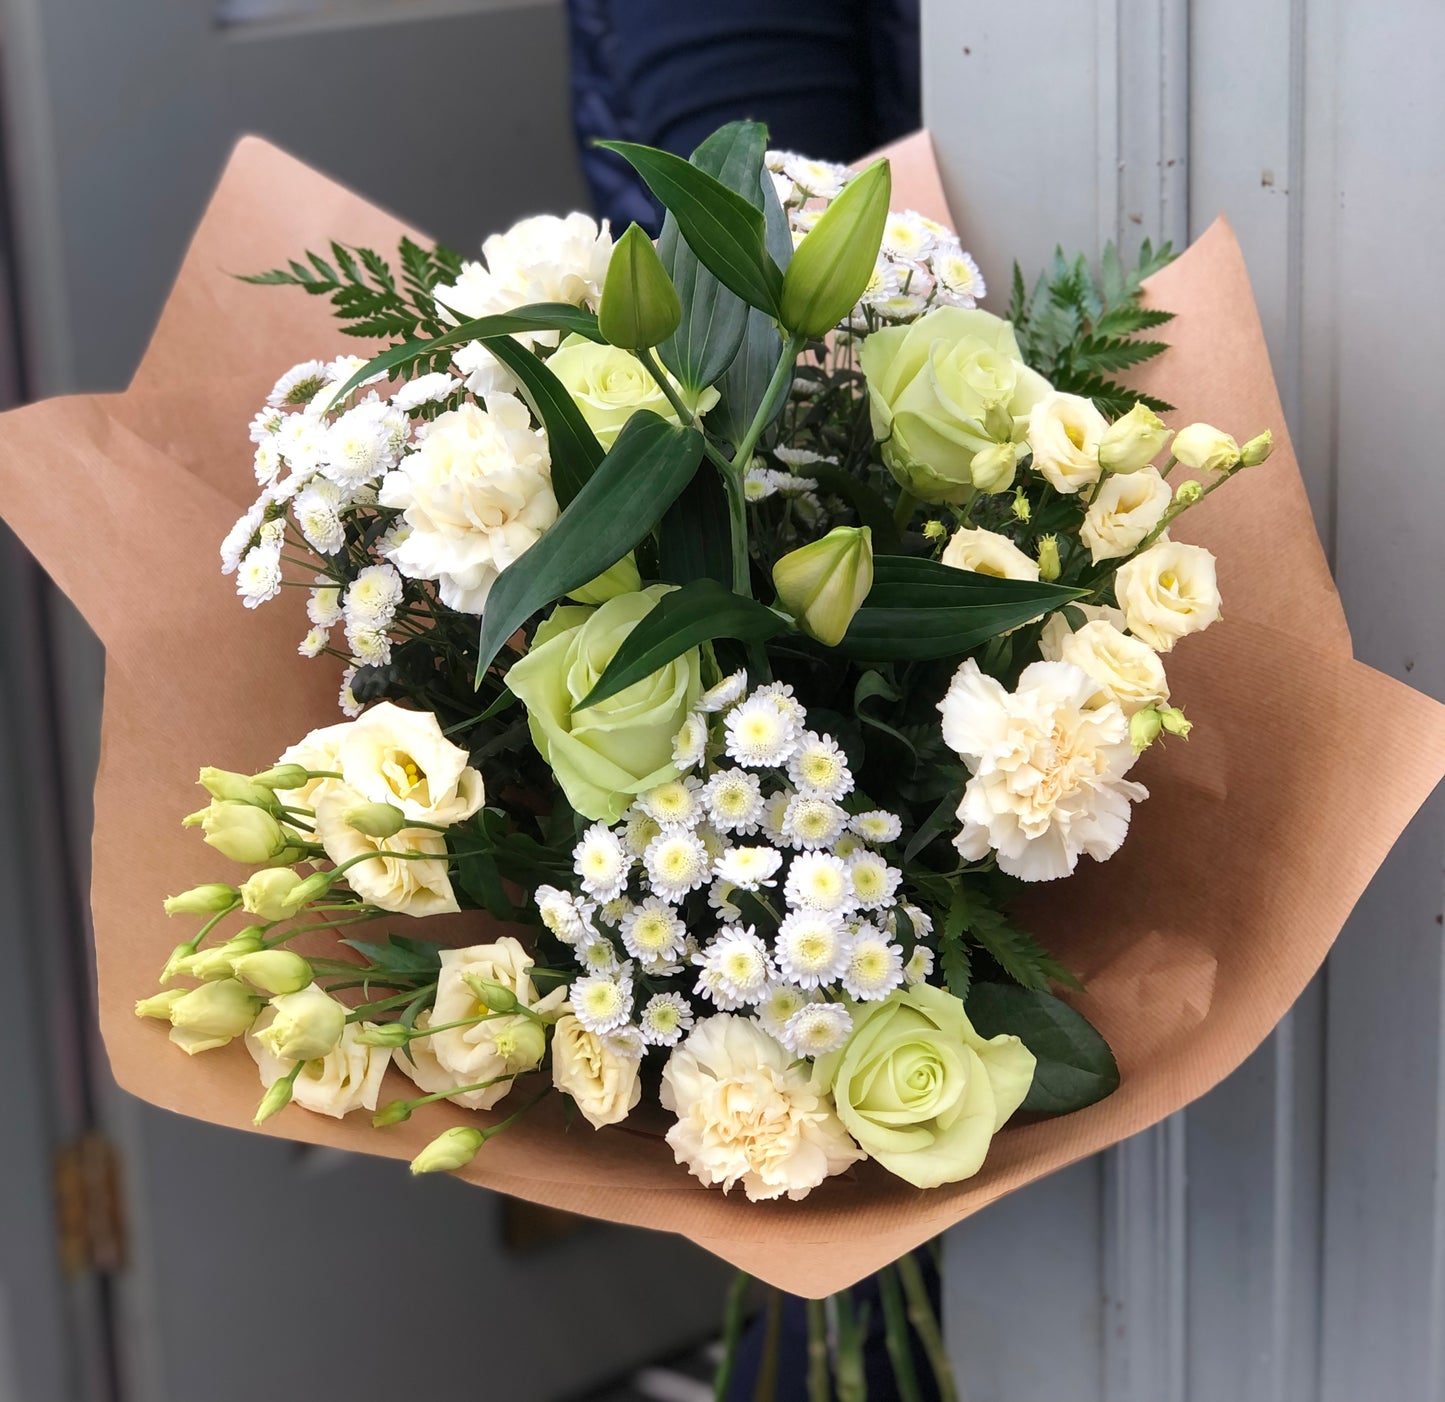 Flowers delivered to your door once a month for 3 Months with the purchase of a Subscription.